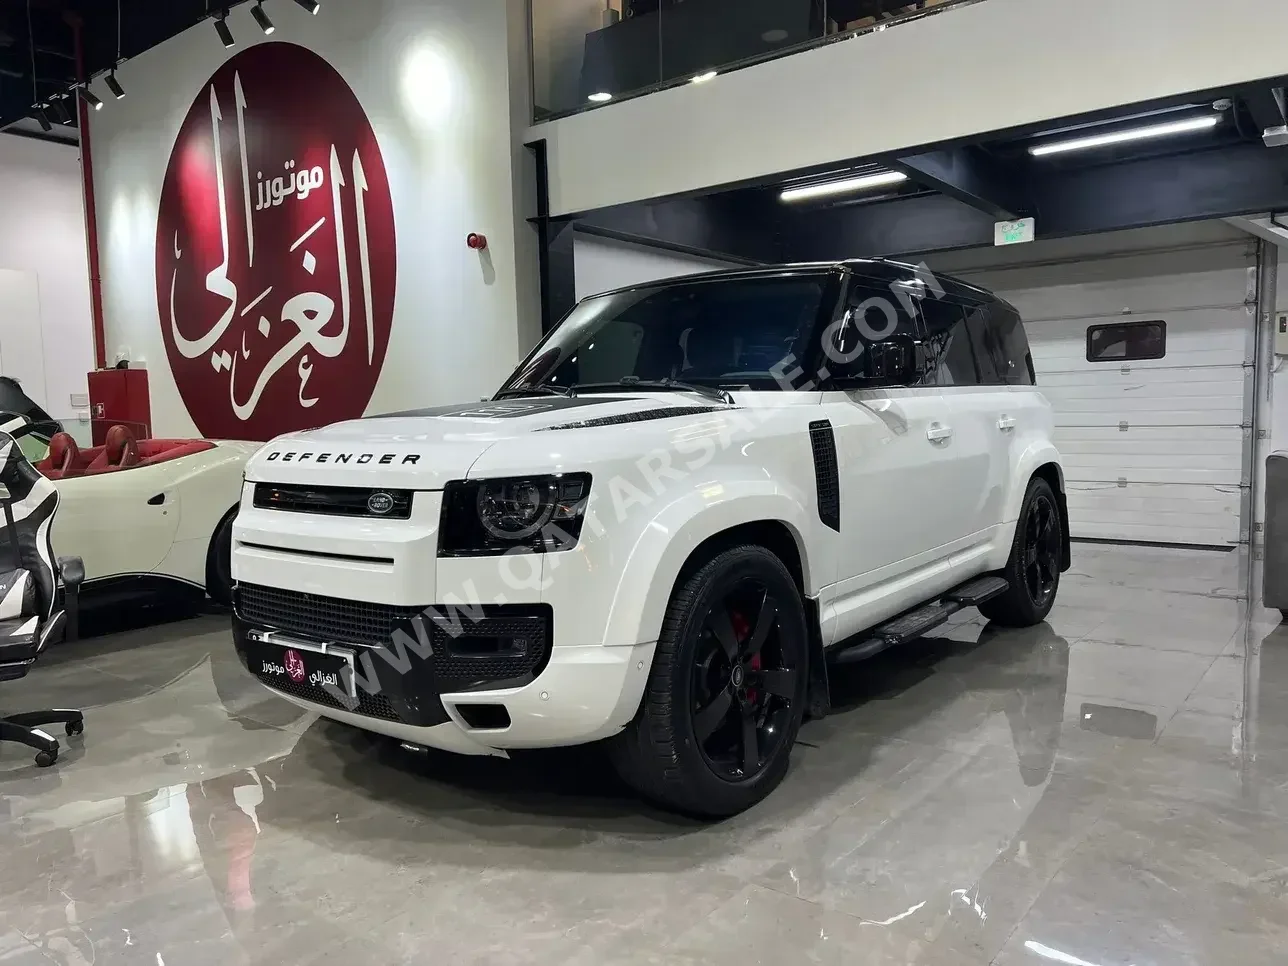  Land Rover  Defender  110 HSE  2022  Automatic  63,000 Km  6 Cylinder  Four Wheel Drive (4WD)  SUV  White  With Warranty